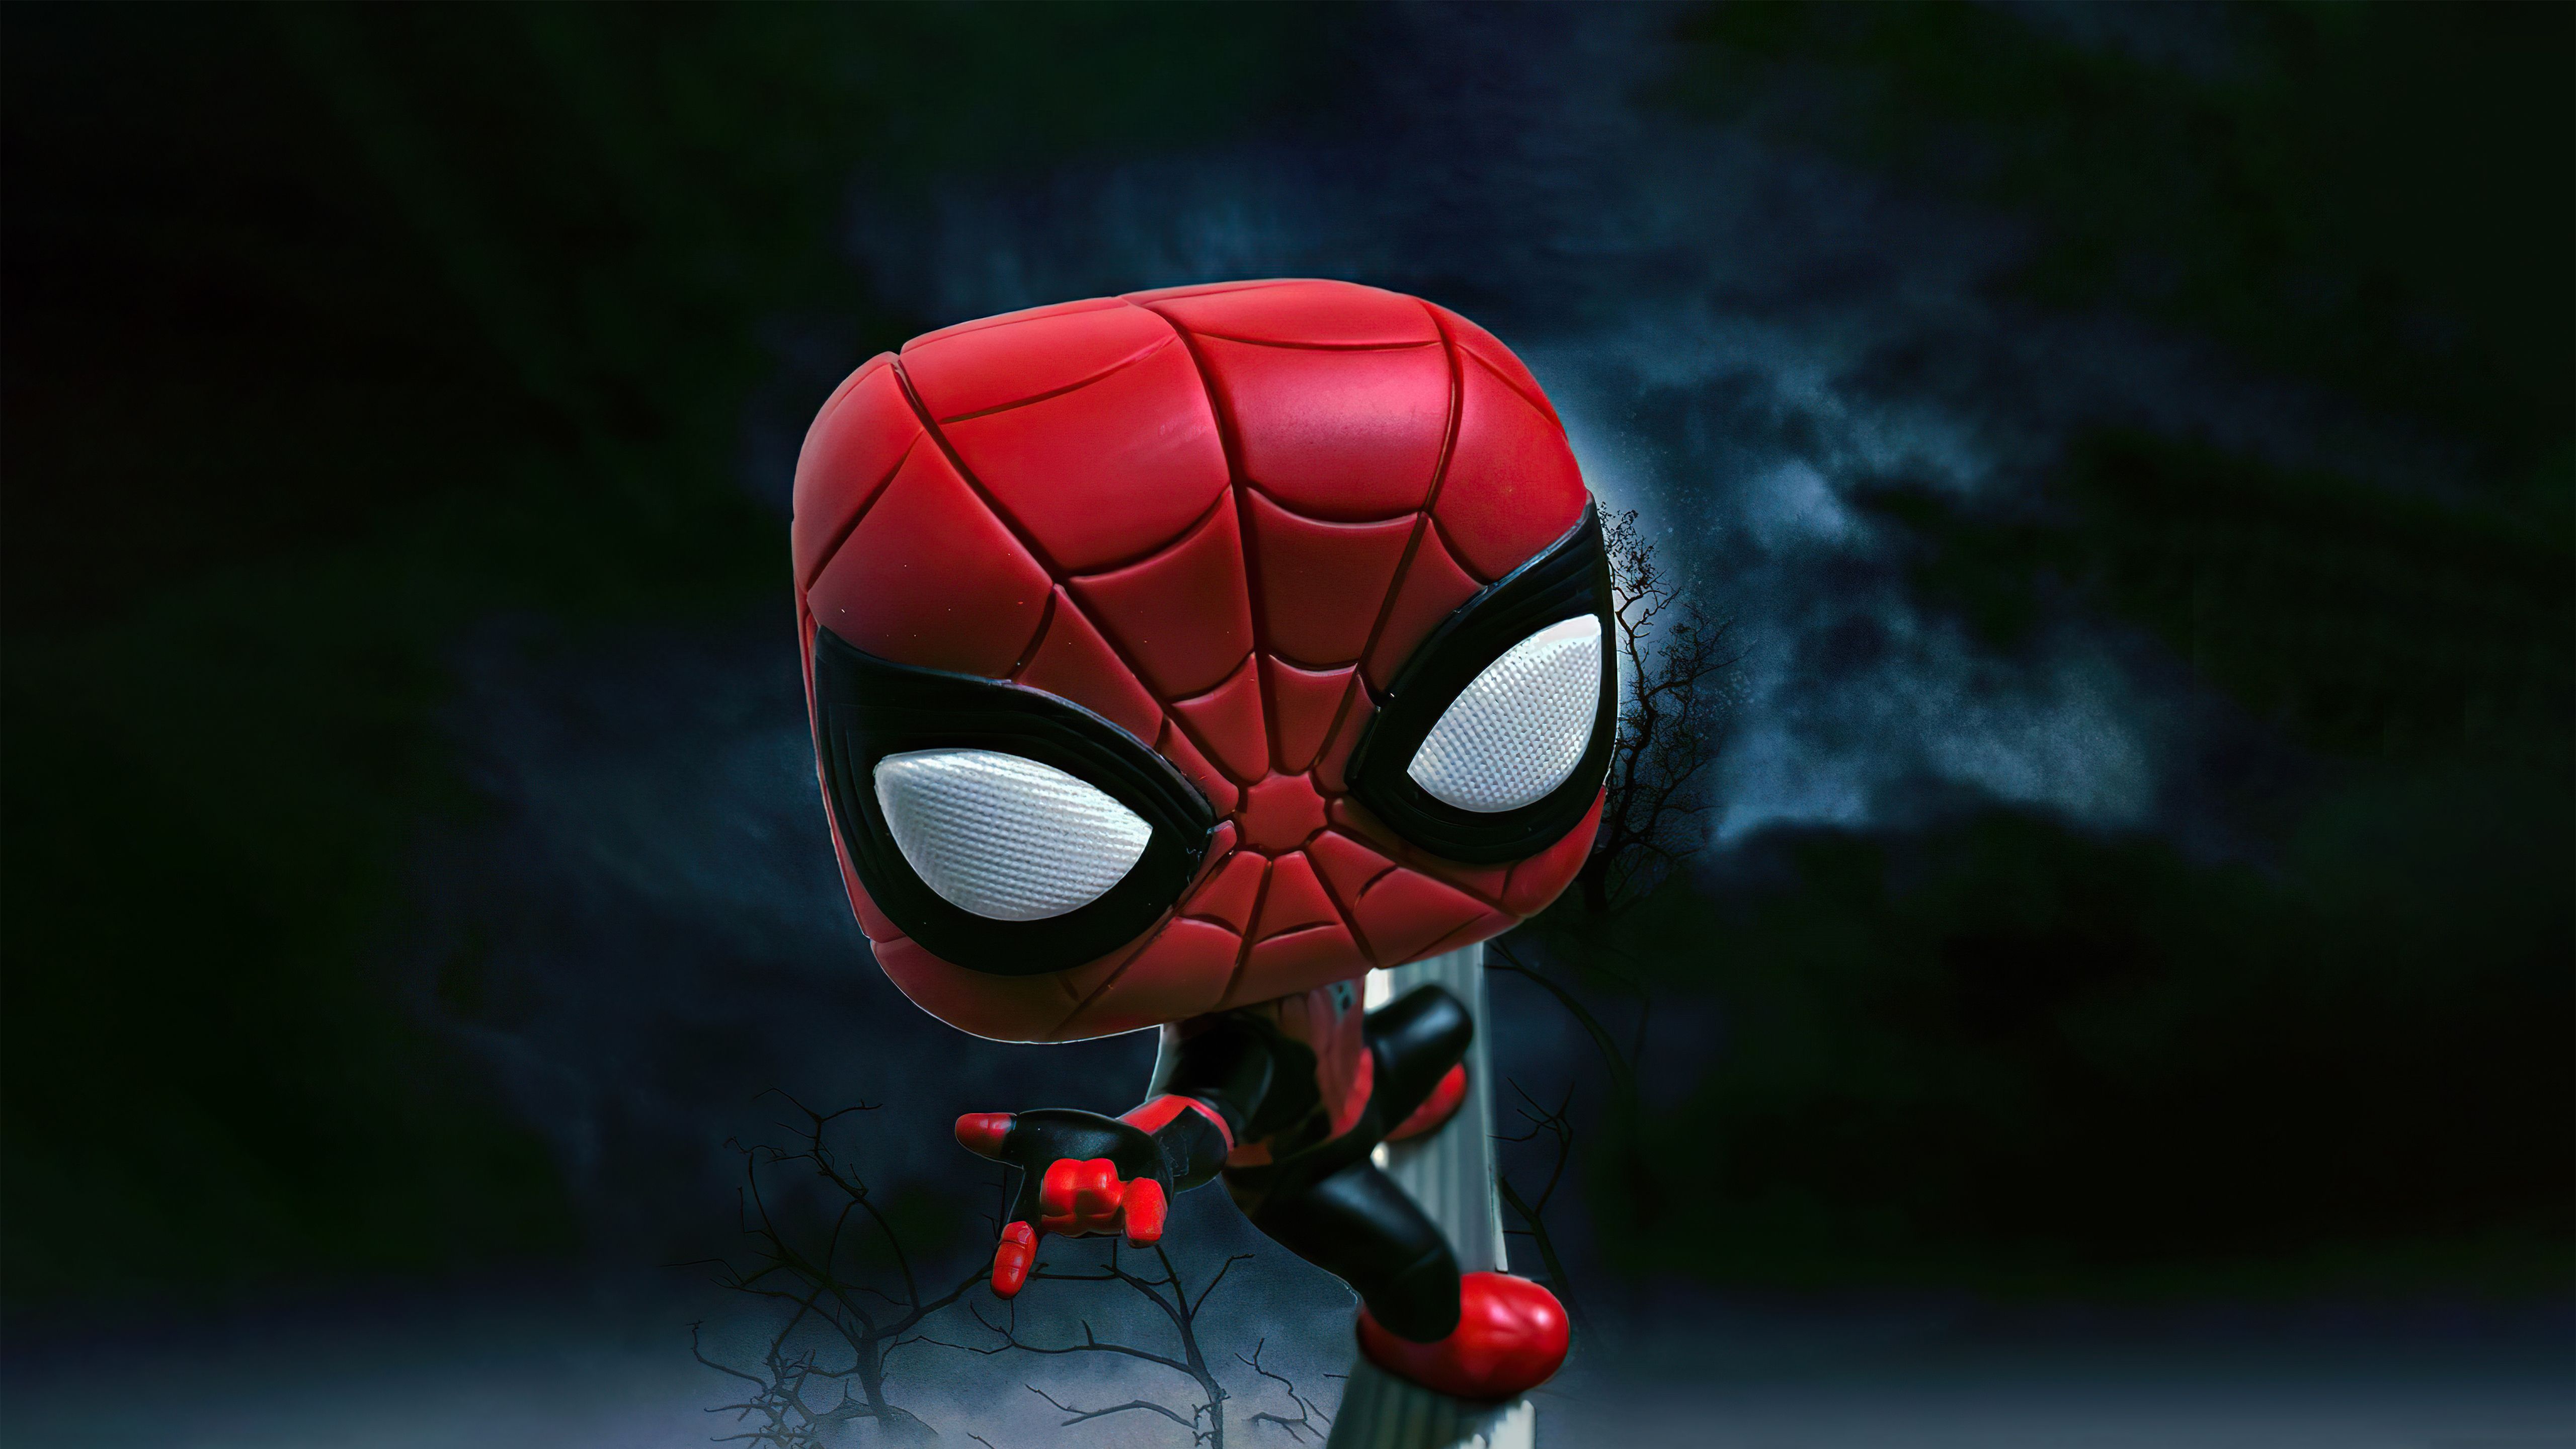 Spiderman Funko 5k HD 4k Wallpaper, Image, Background, Photo and Picture